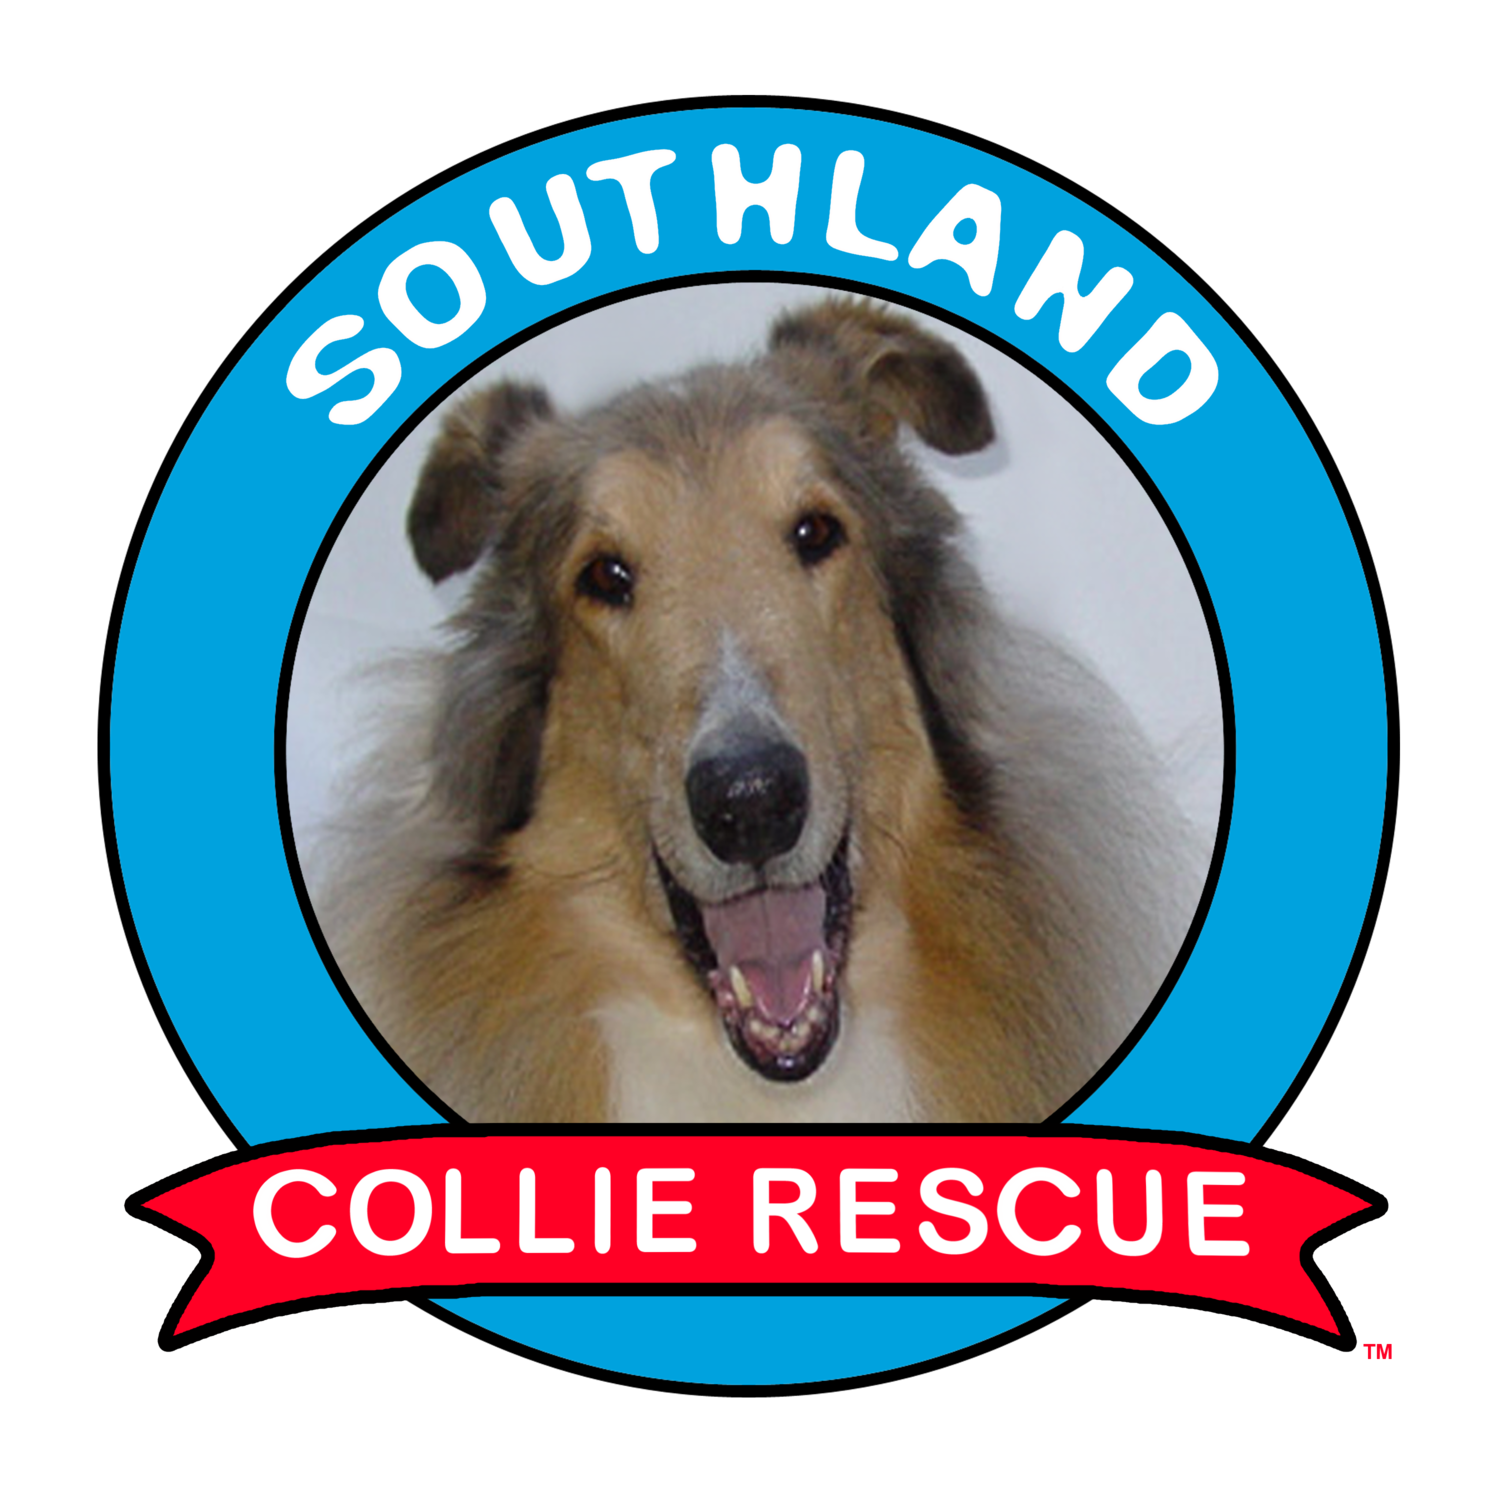 Southland Collie Rescue